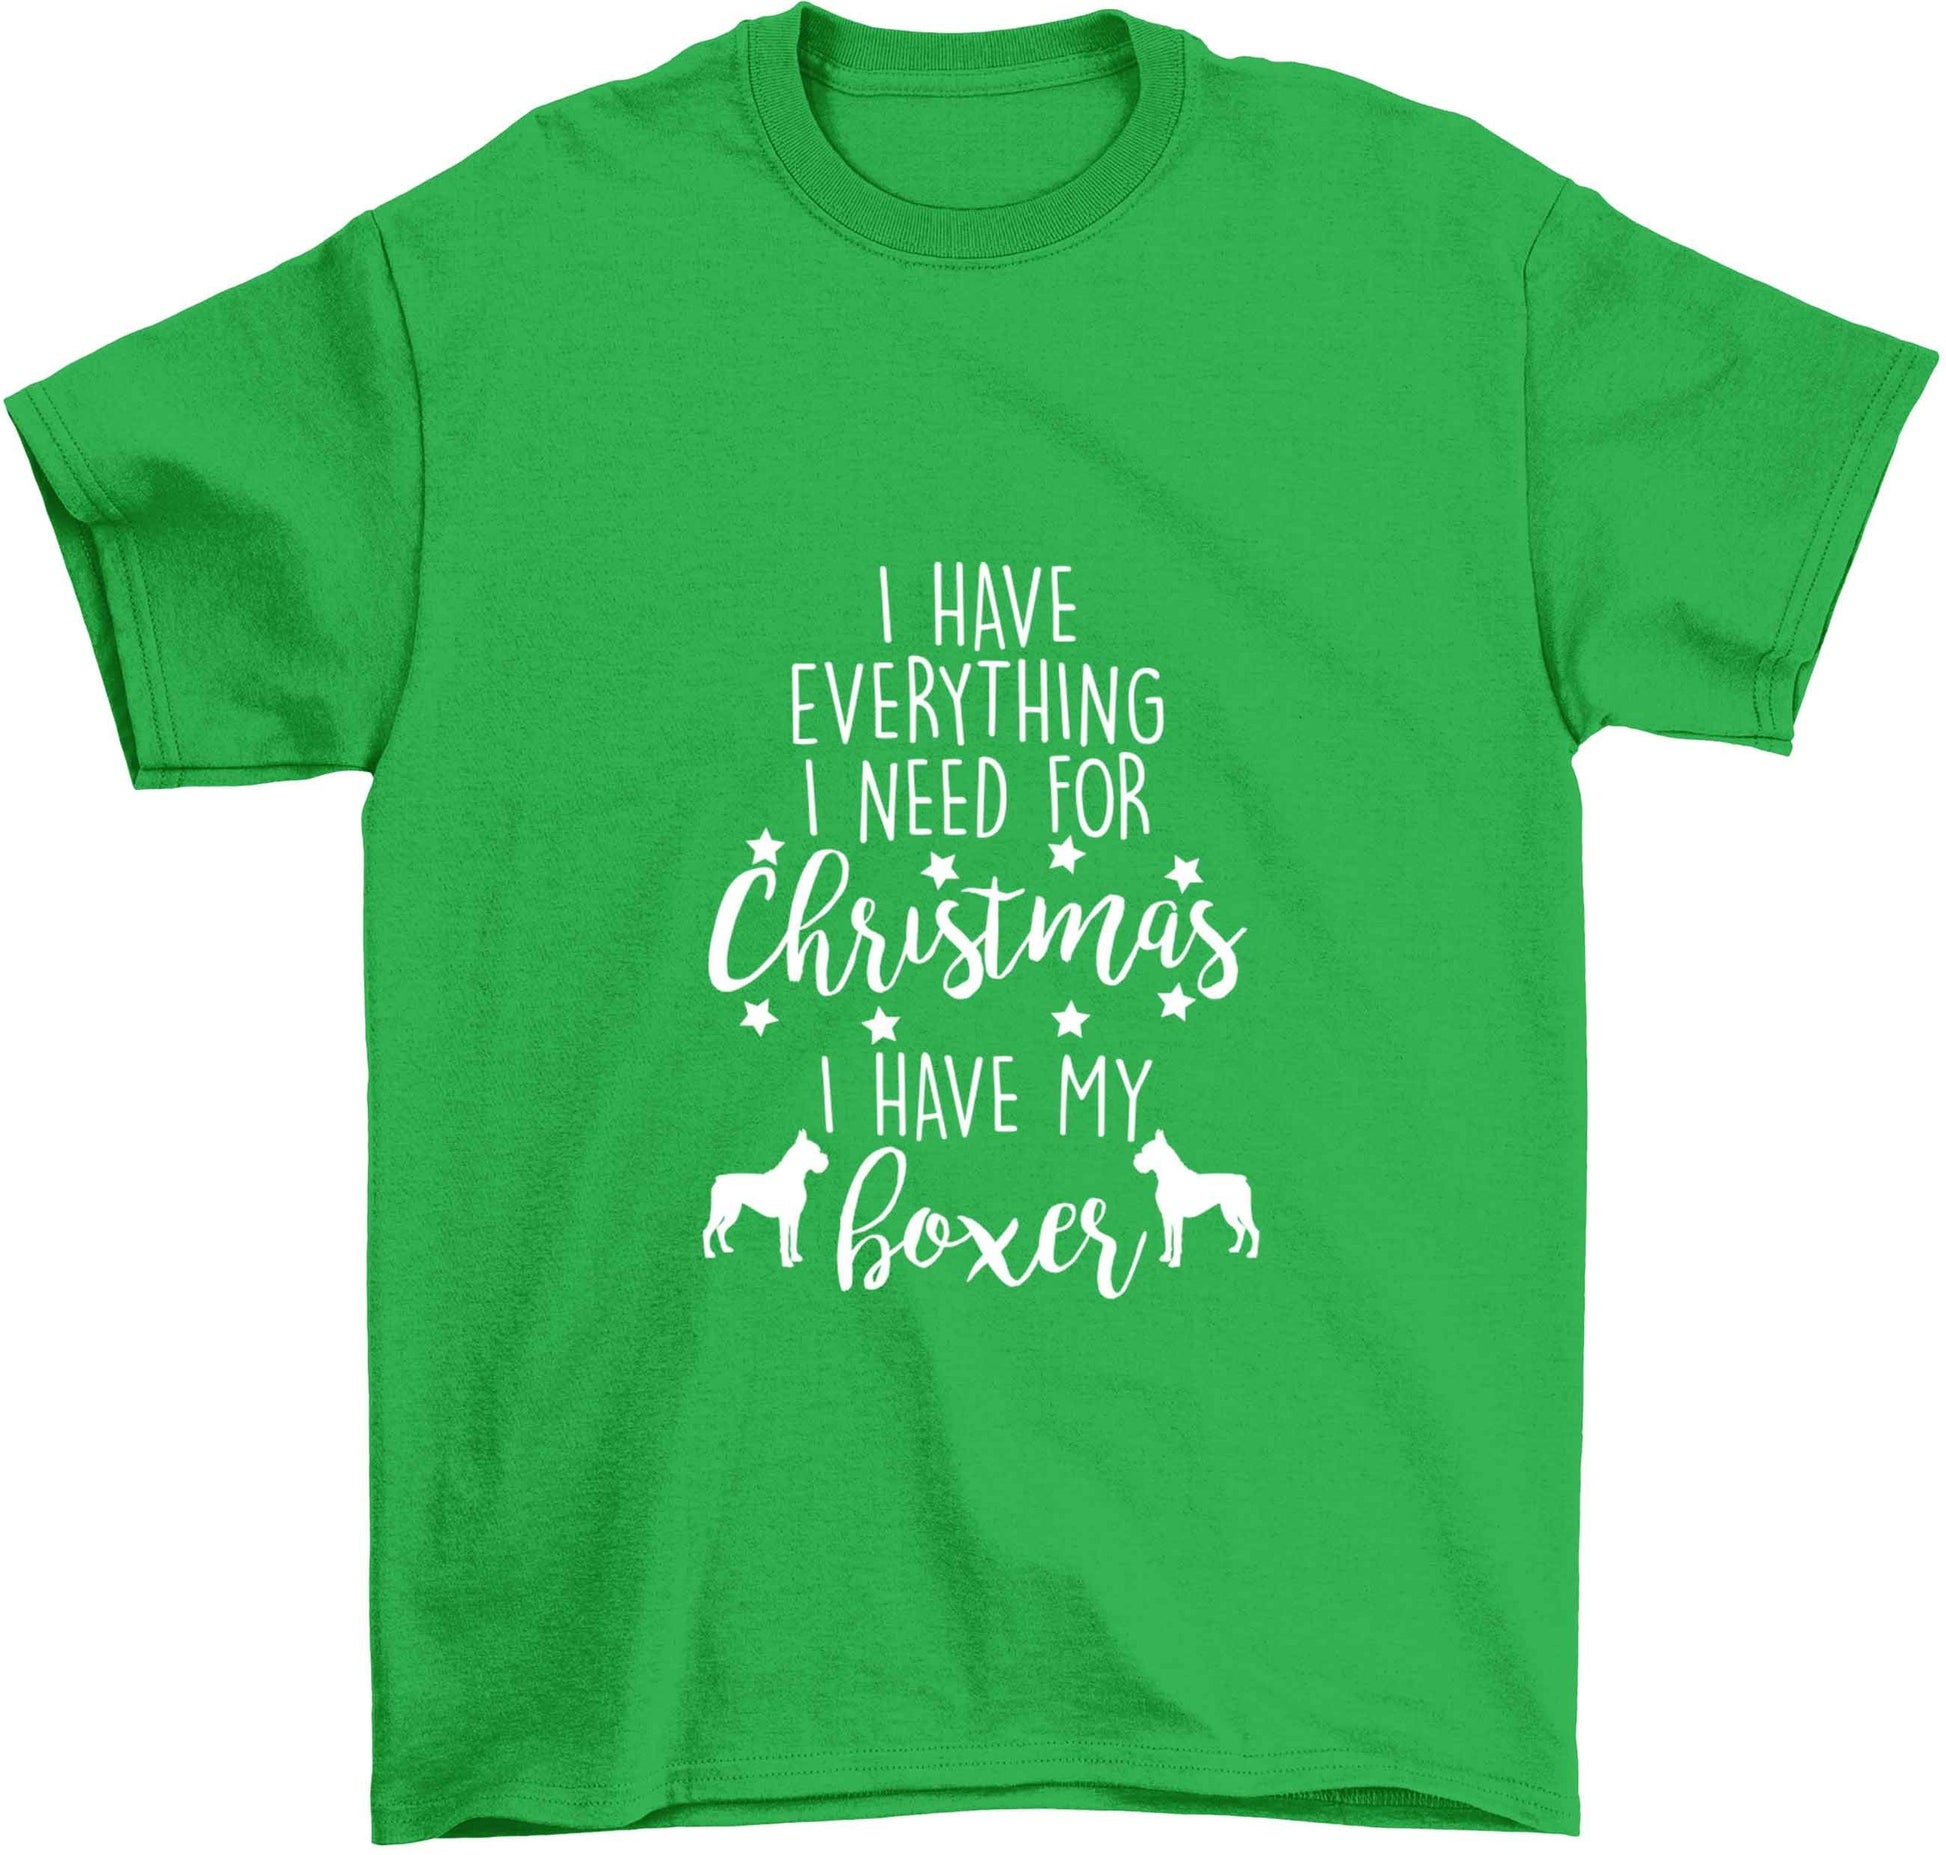 I have everything I need for Christmas I have my boxer Children's green Tshirt 12-13 Years